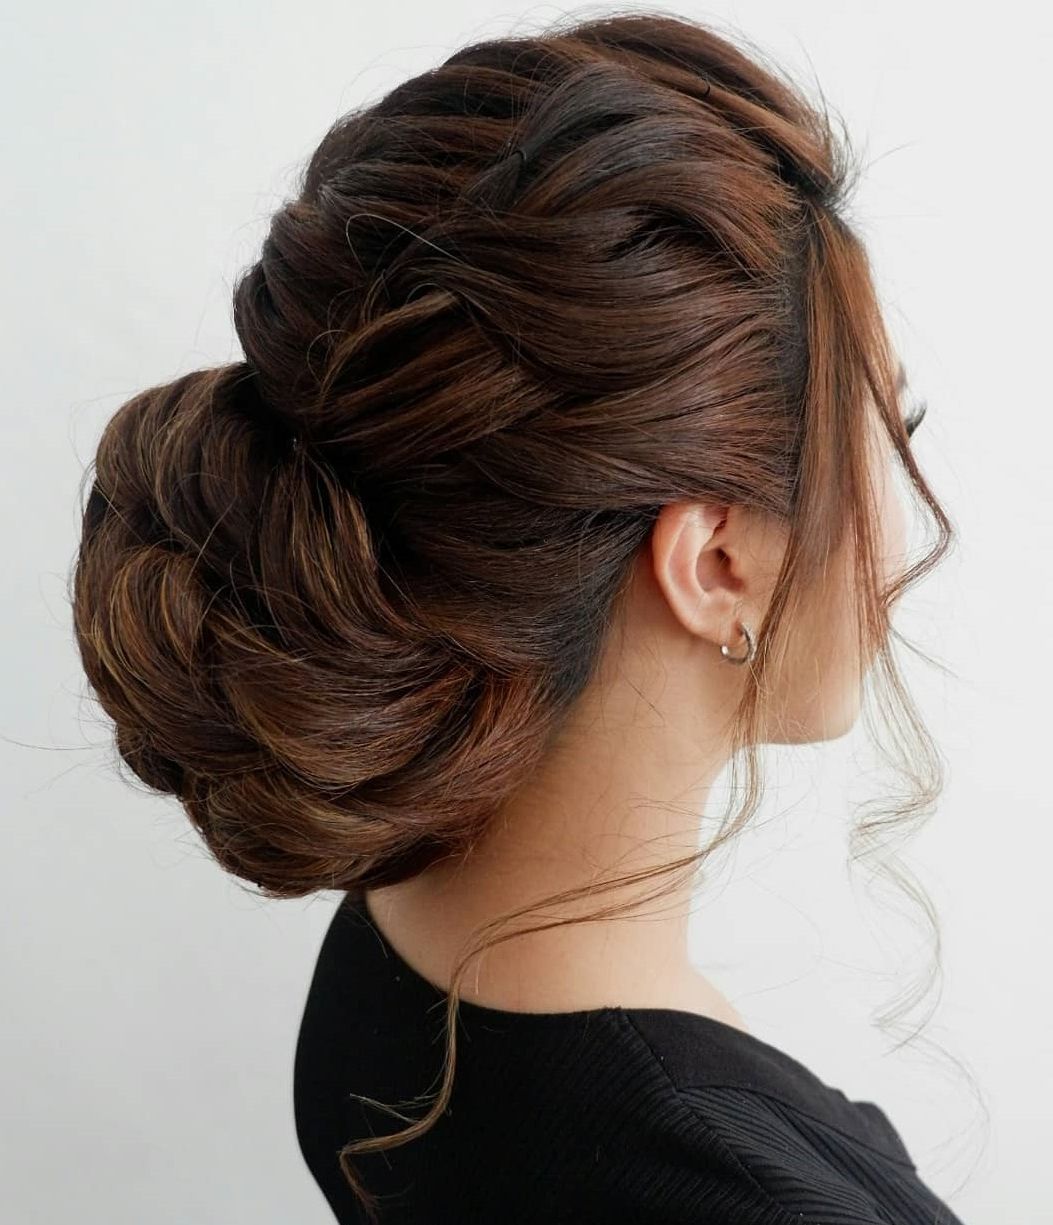 Popular Halo Braid Hairstyles With Long Tendrils Throughout 30 Picture Perfect Updos For Long Hair Everyone Will Adore (View 15 of 20)